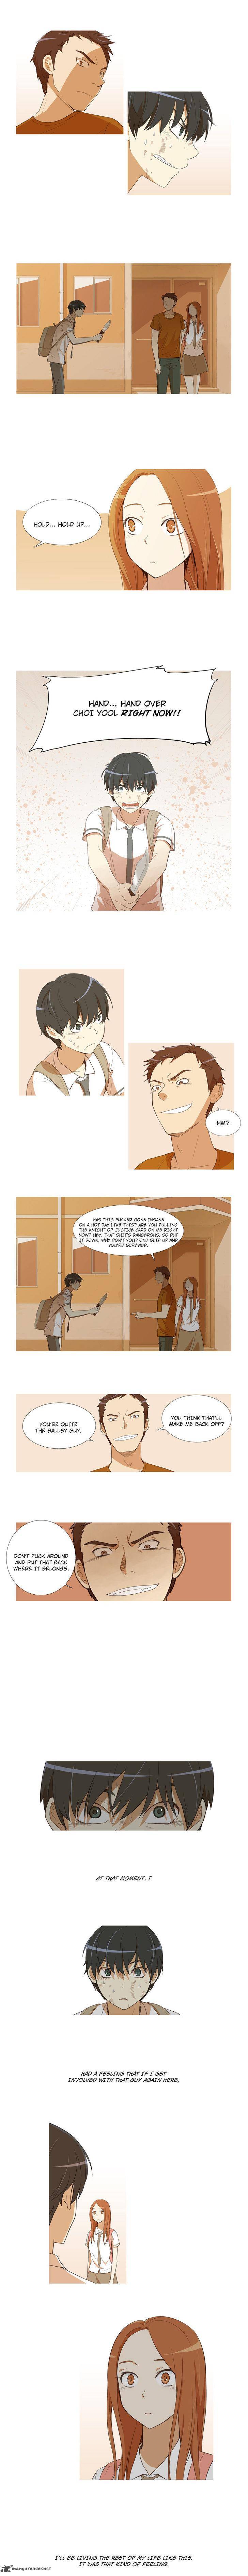 Gaussian Blur Chapter 6 Page 3